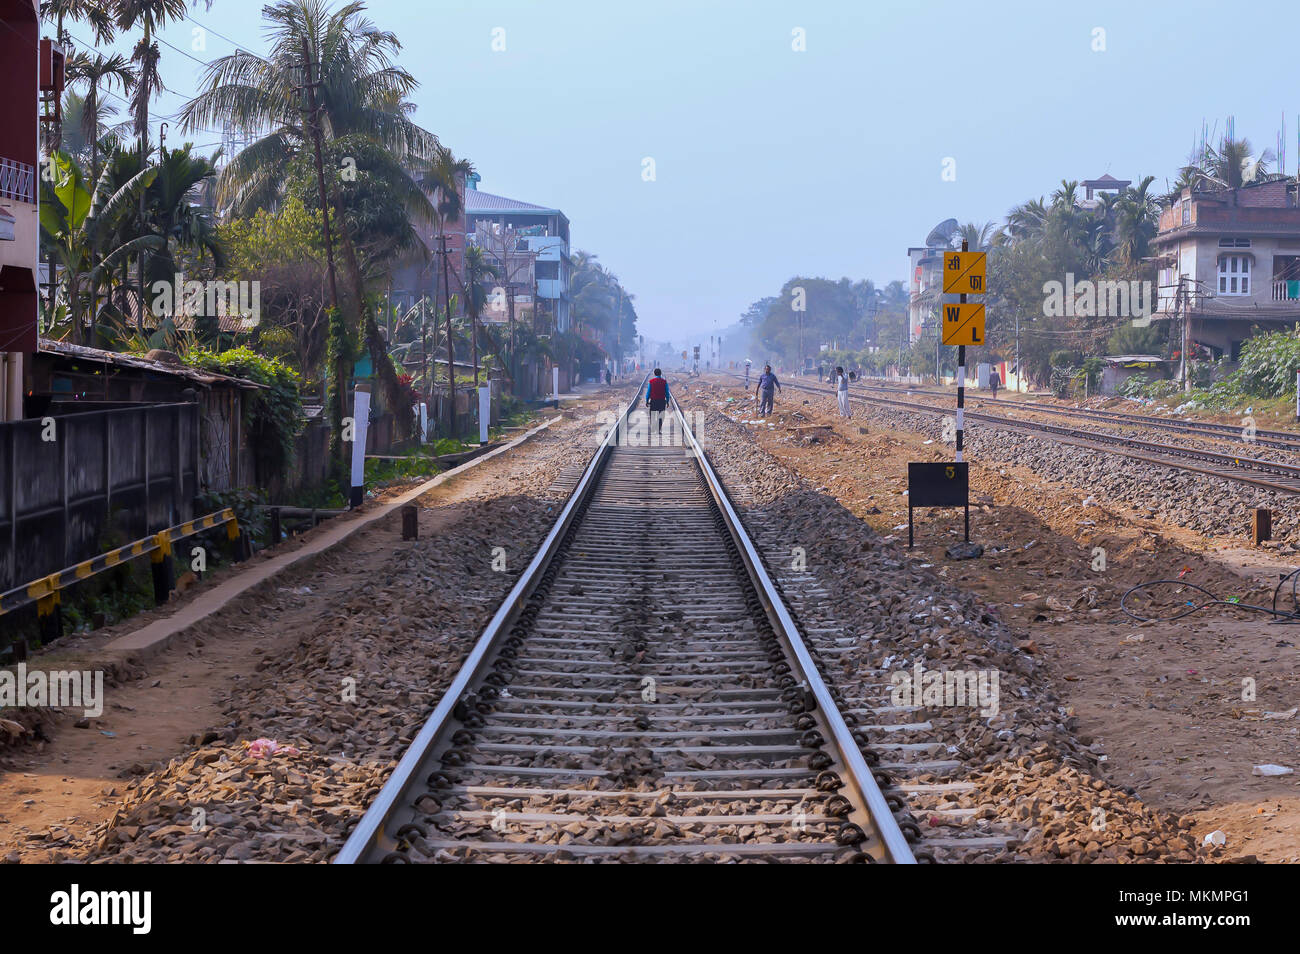 A man walks nonchalantly on the sleepers of a railway tracks, in India, while workers work next to the tracks. Residential houses abut the lines. Stock Photo